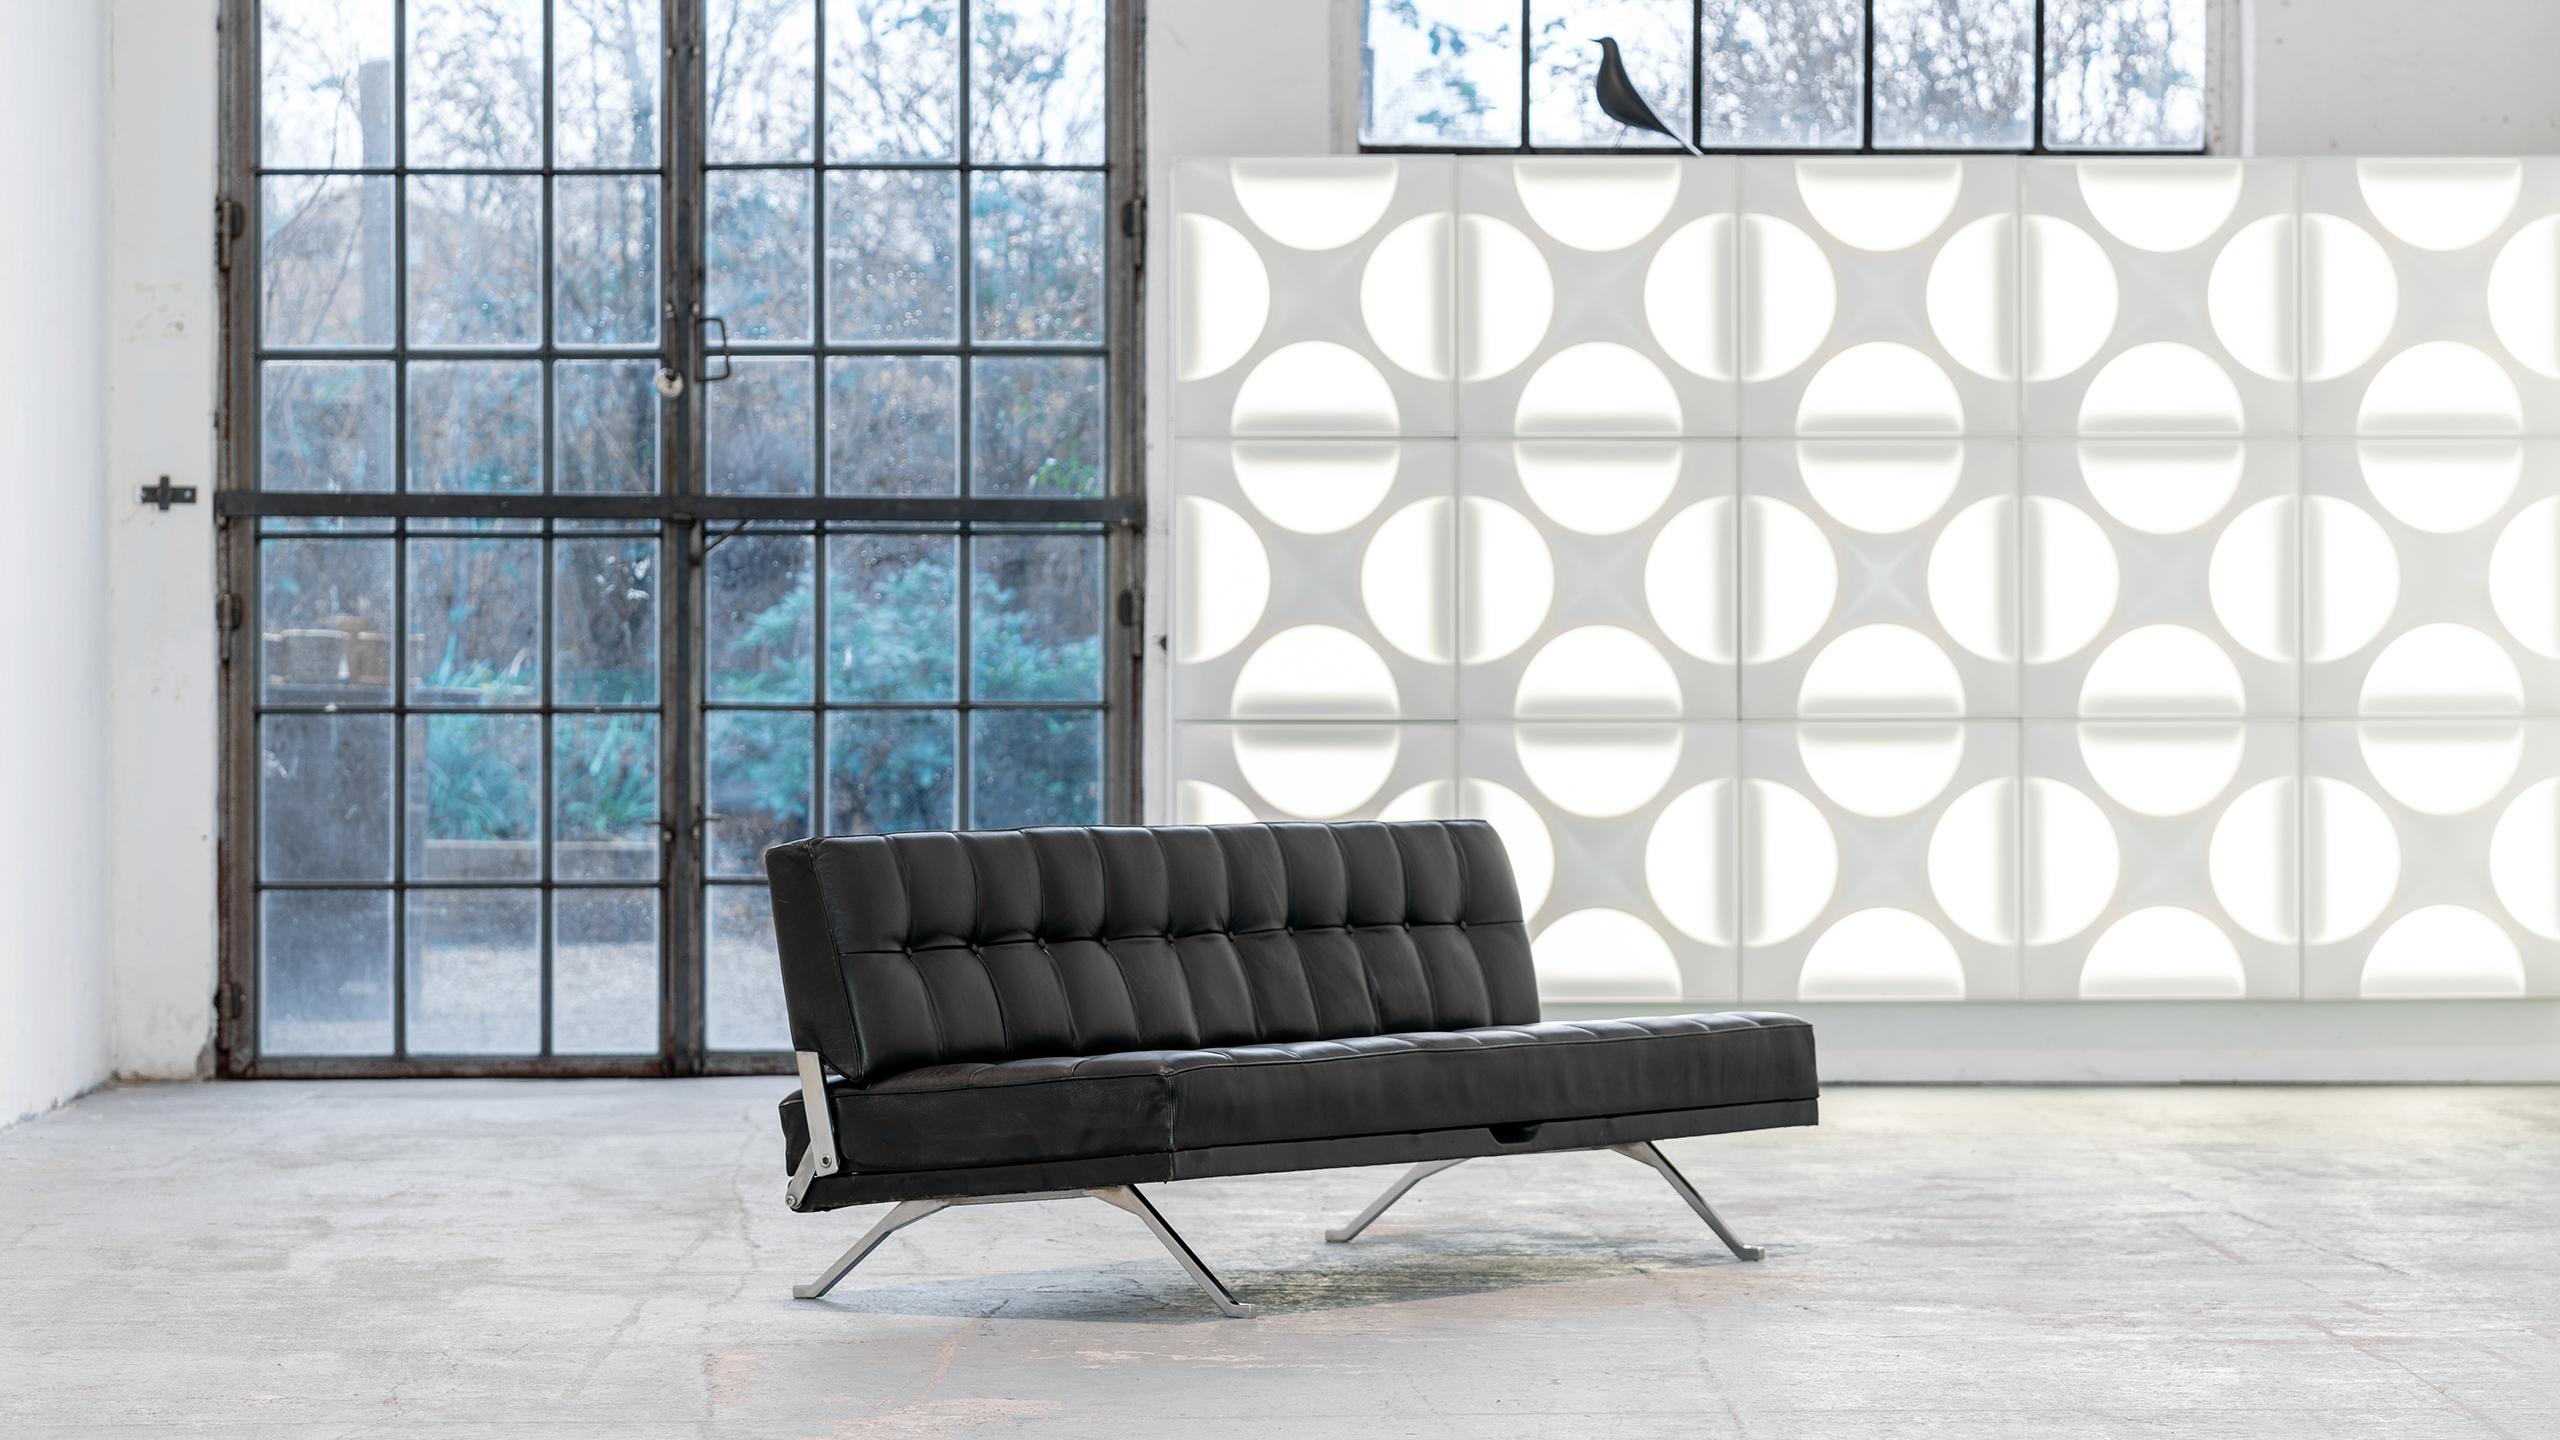 Johannes spalt constanze daybed 1961 for Franz Wittmann - Austria.

Sectional steel frame, original black leather cover.

This Austrian daybed named ‘Contanze’ is typical for Mid-Century Modern design from Austria. The tufted leather seat and